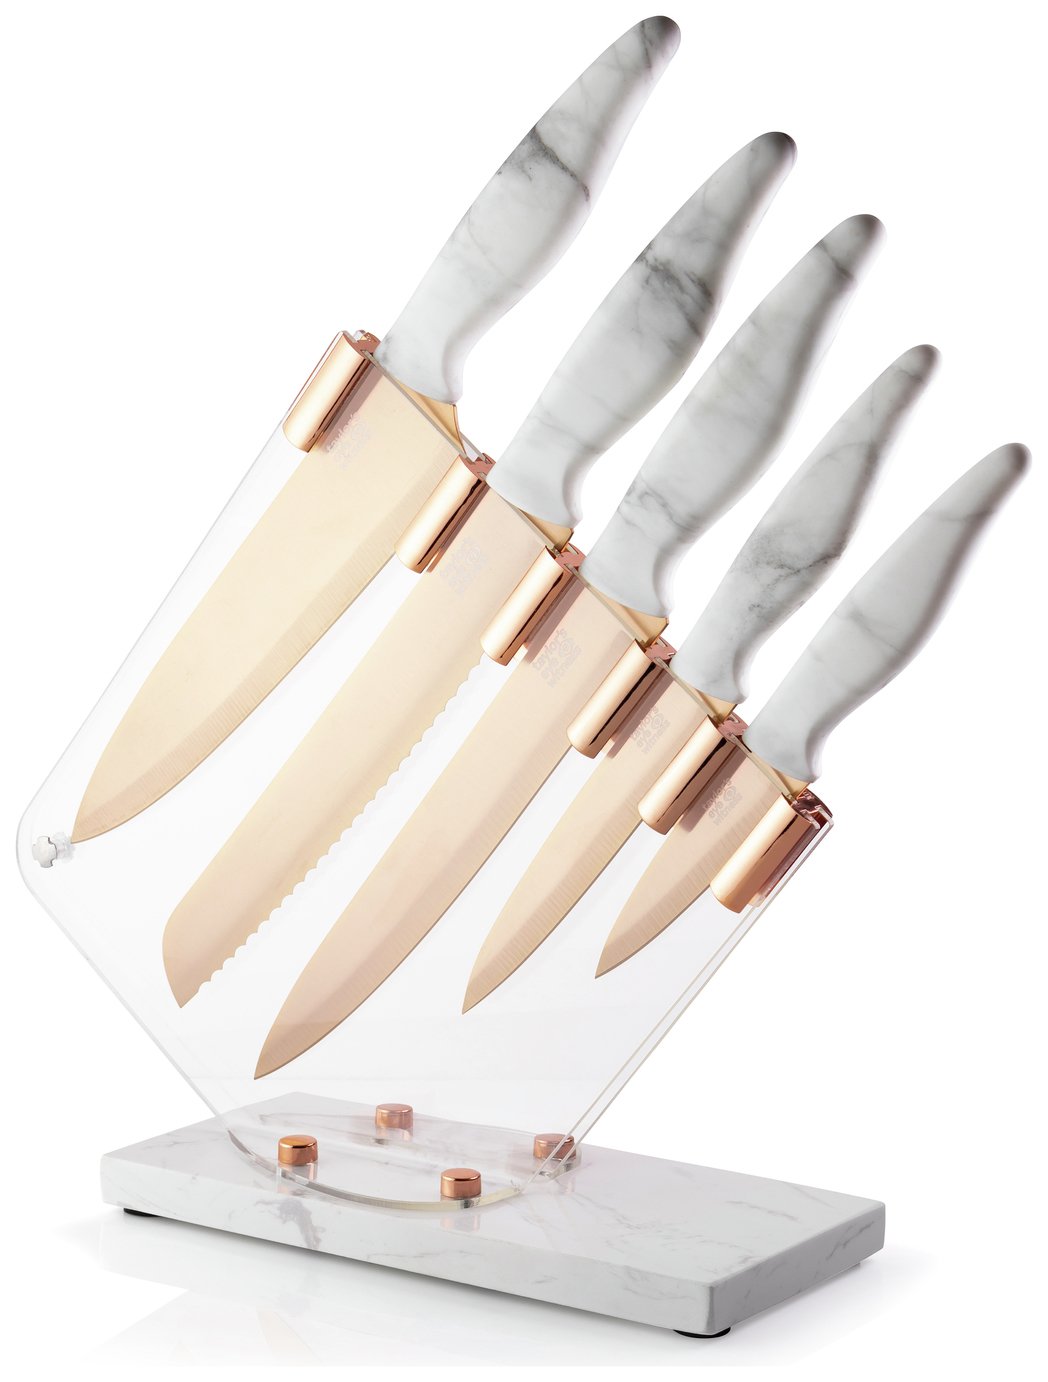 Taylors Eye Witness 5 Piece Marble and Rose Gold Knife Block